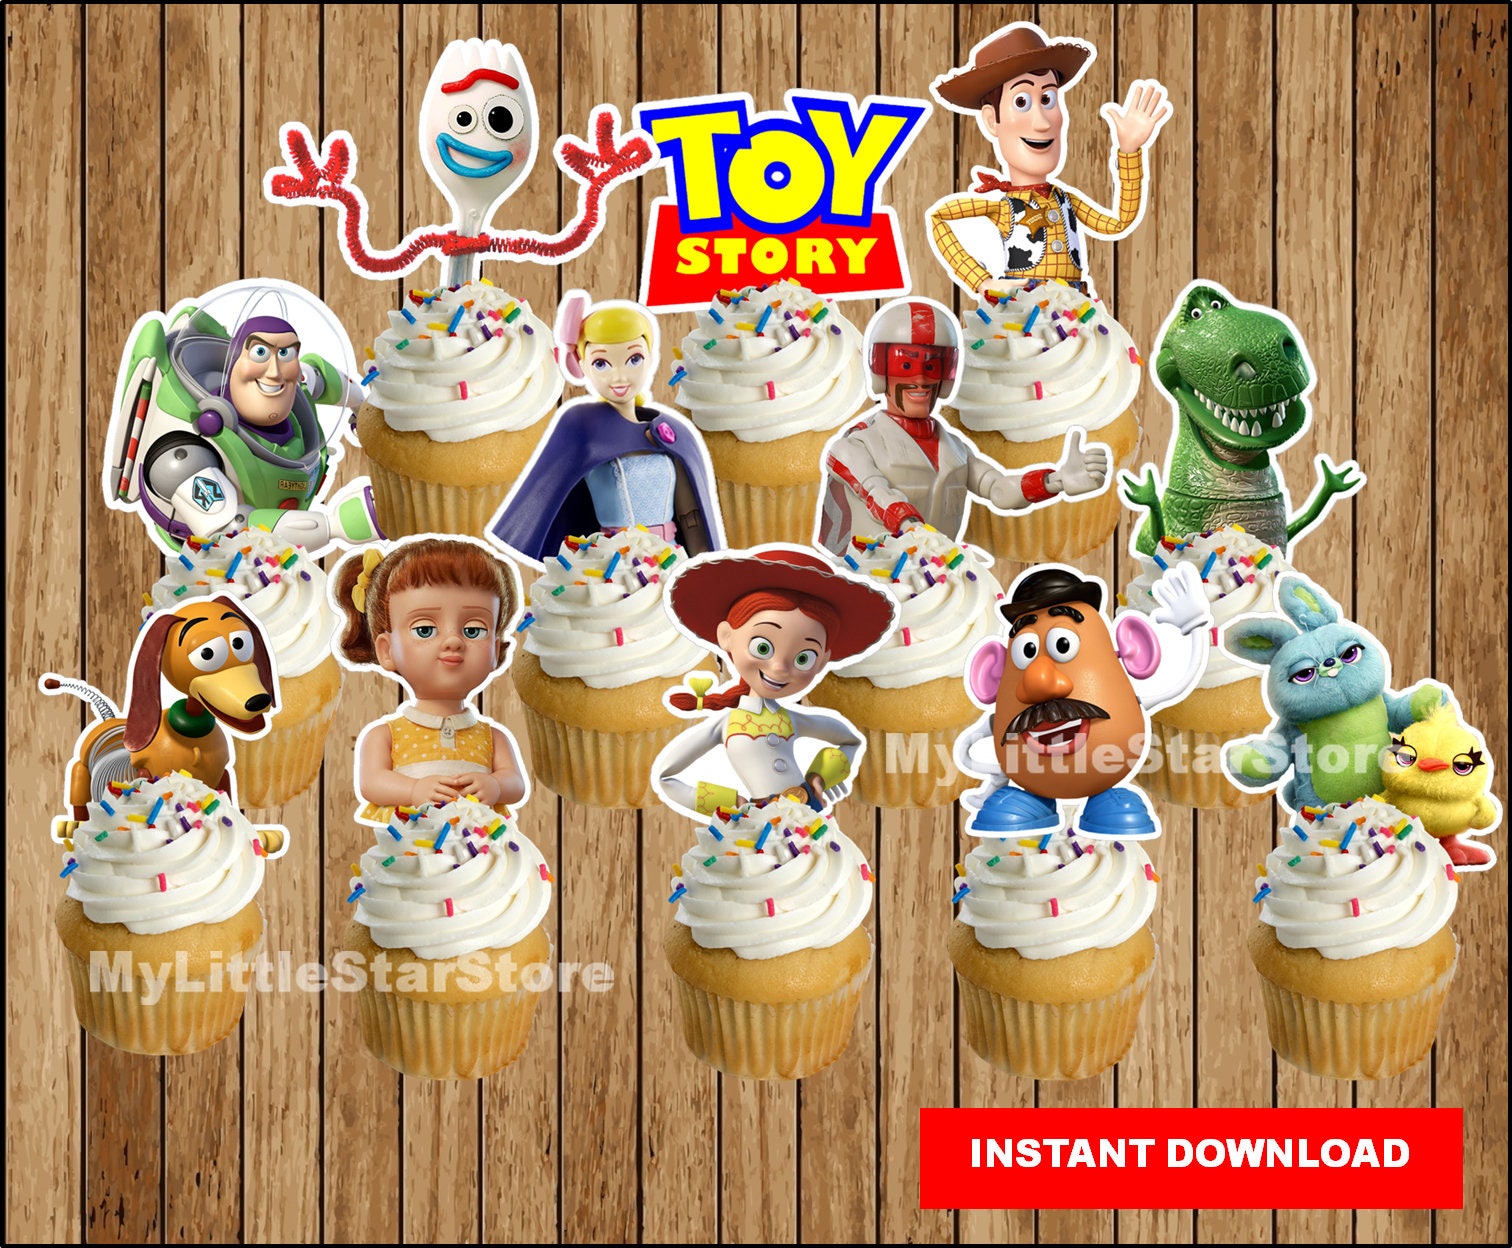 Toy Story Forky Cupcakes - Big Bear's Wife